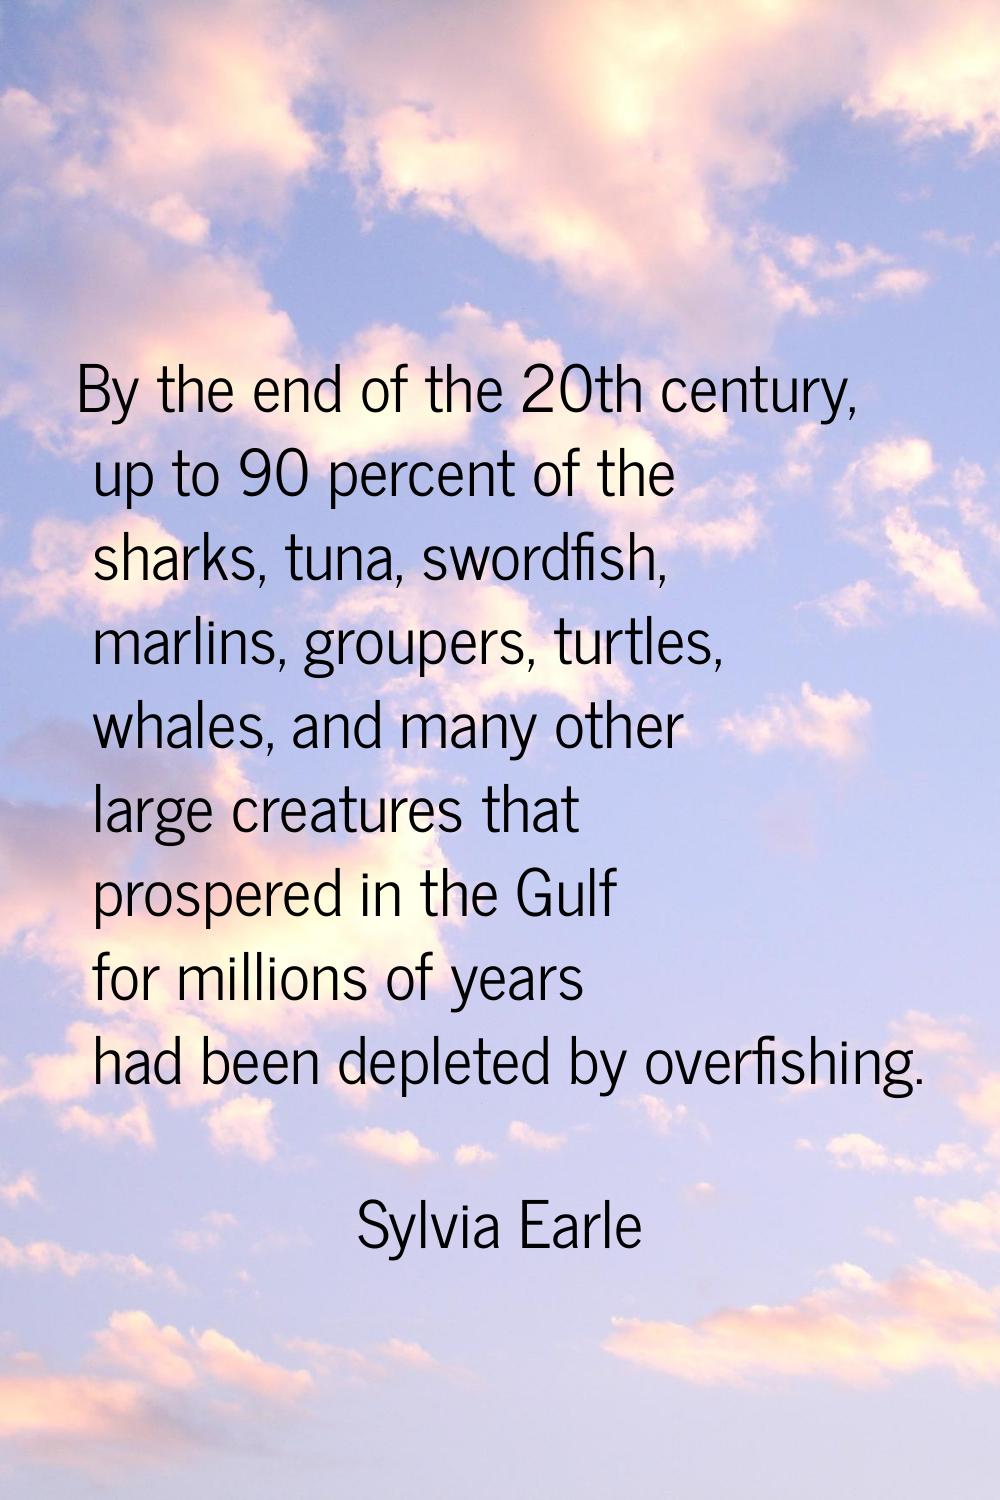 By the end of the 20th century, up to 90 percent of the sharks, tuna, swordfish, marlins, groupers,